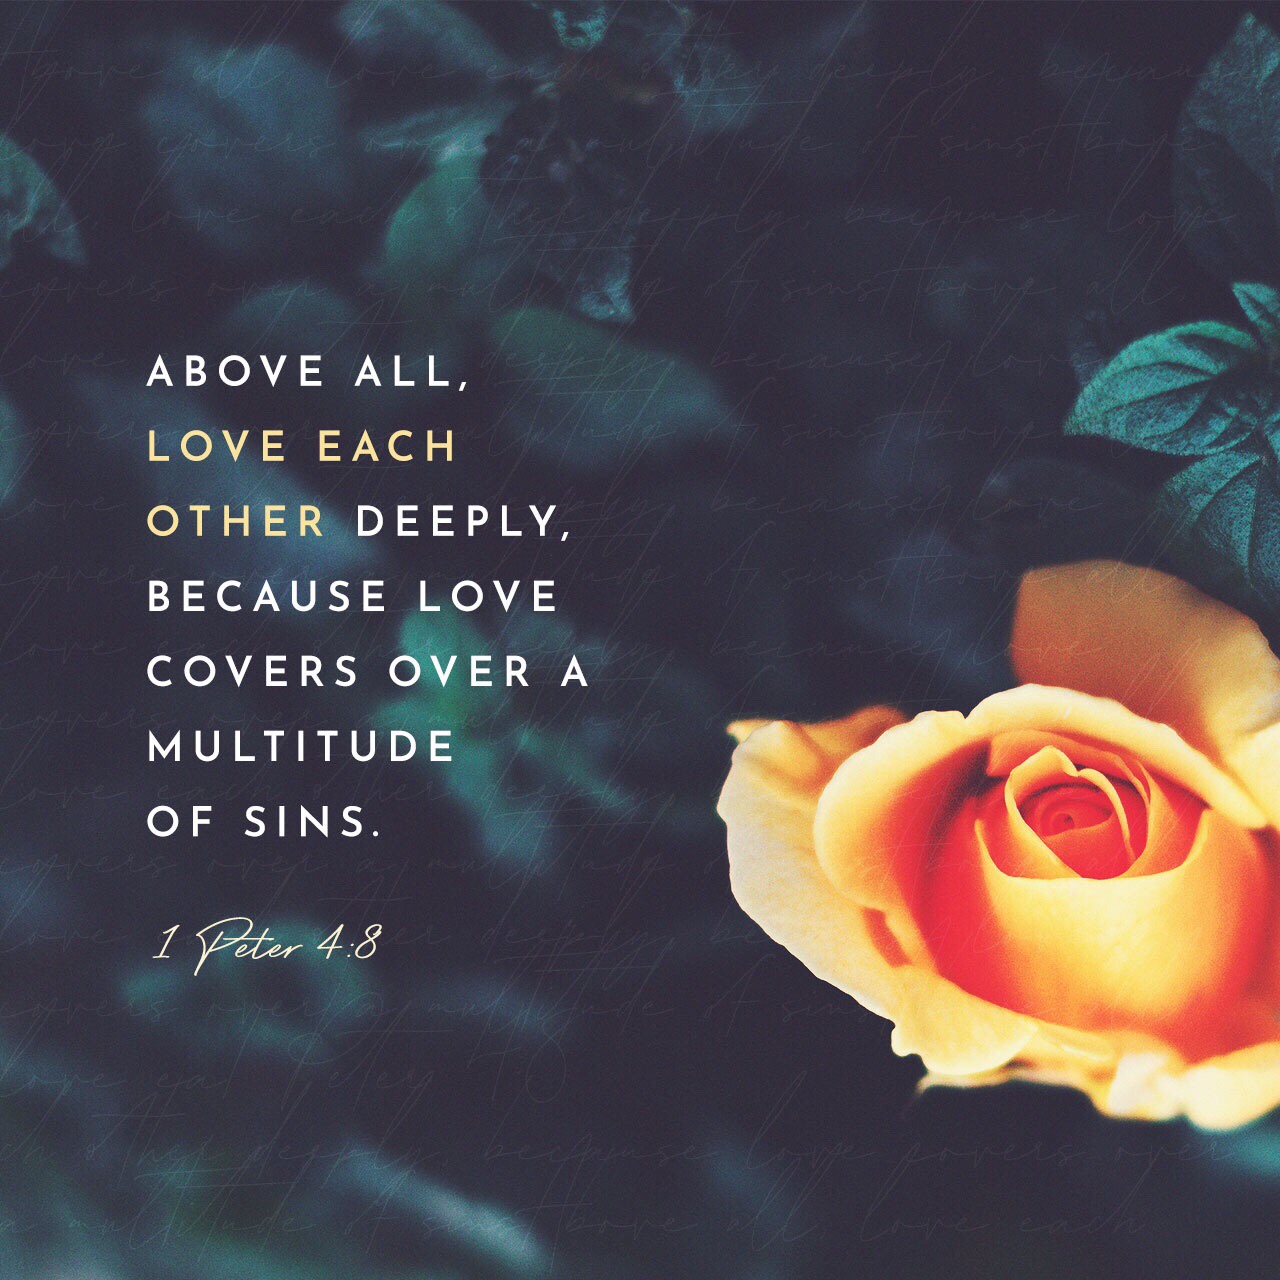 VOTD August 9, Above all, keep fervent in your love for one another, because love covers a multitude of sins. 1 Peter 4:8